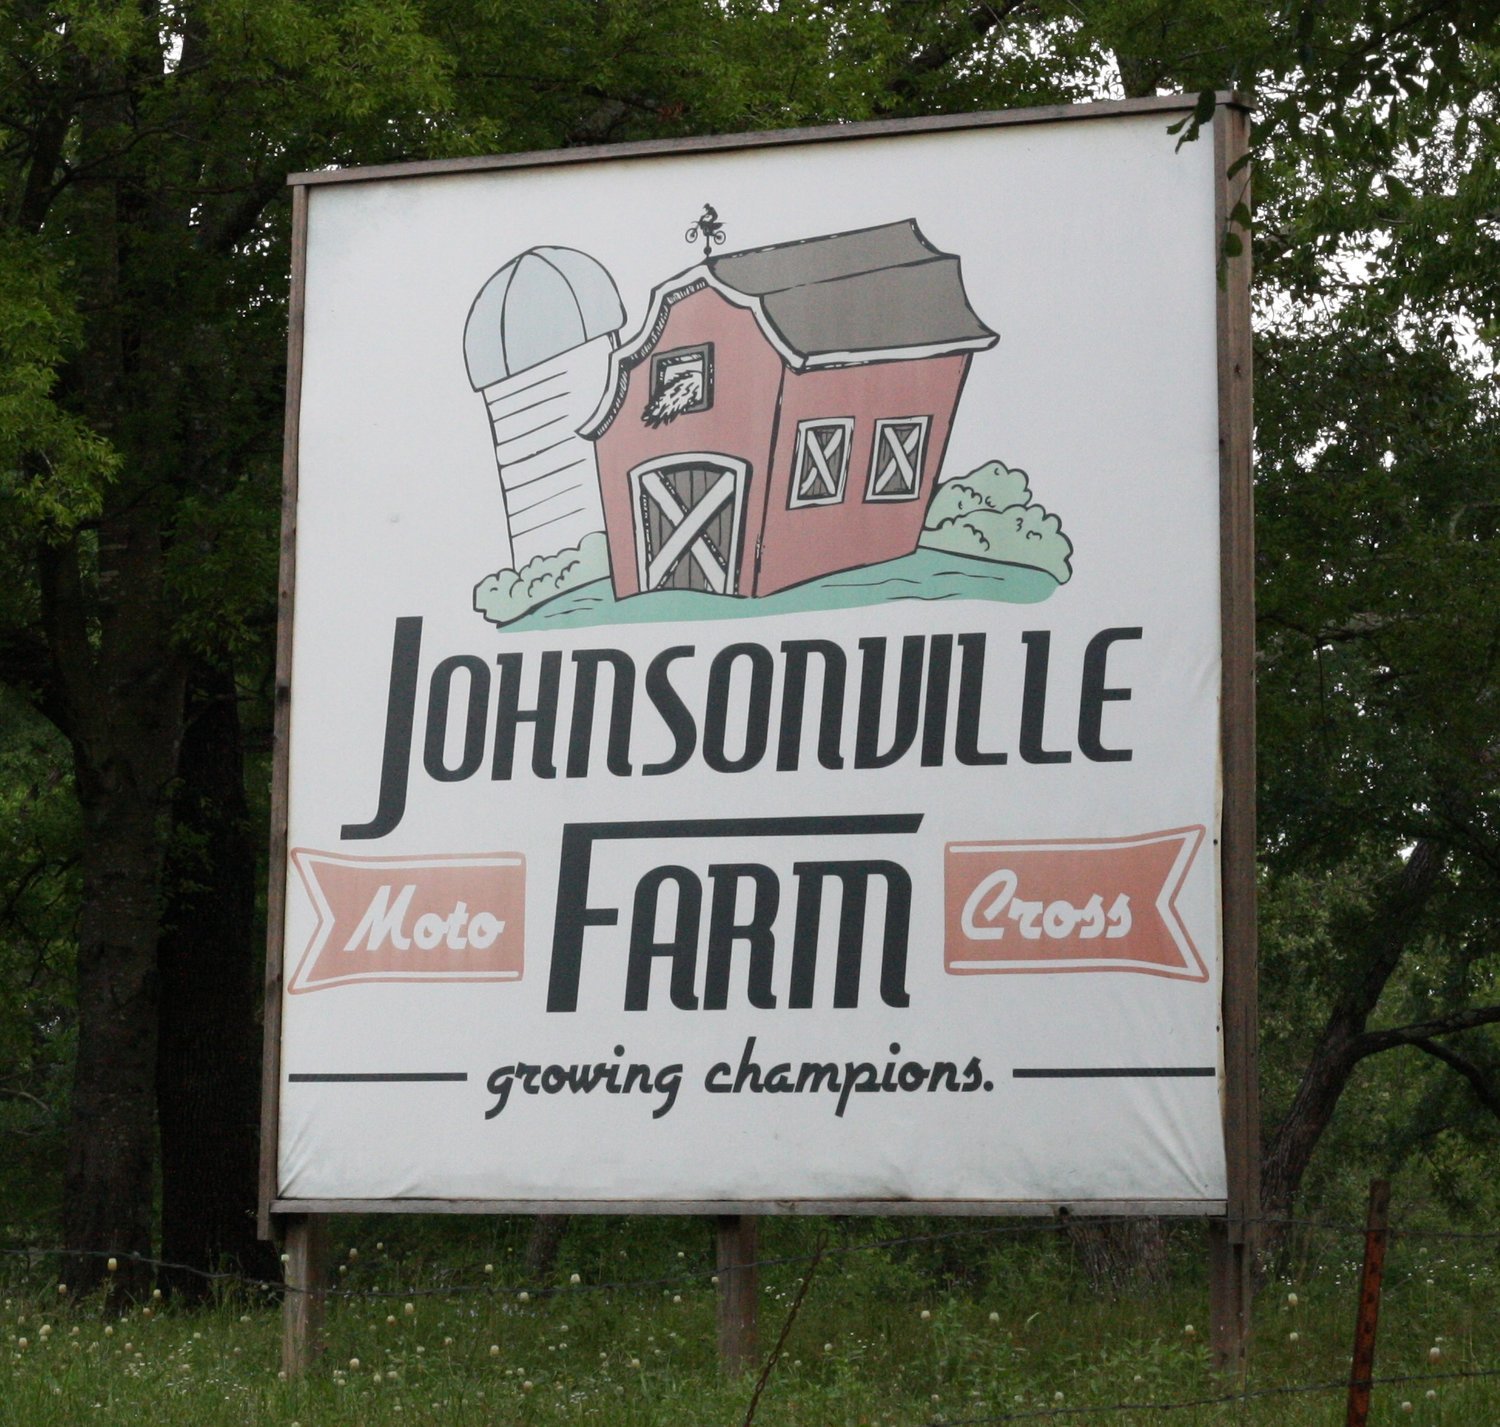 The Johnsonville Motocross Farm just south of Yantis hosts national level qualifying races.